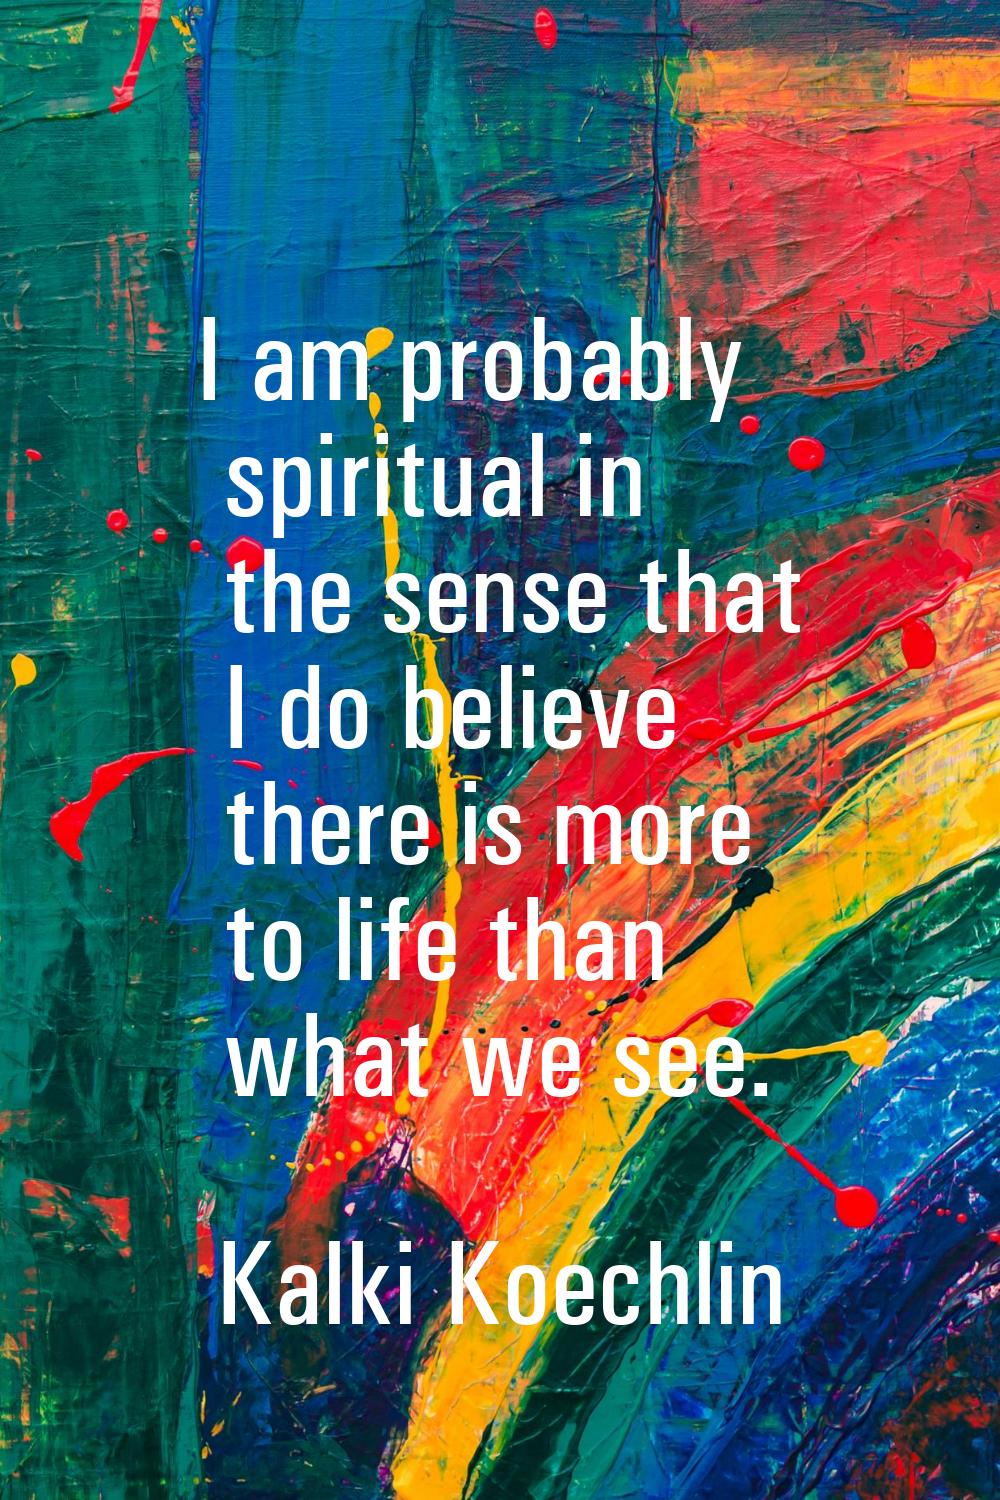 I am probably spiritual in the sense that I do believe there is more to life than what we see.